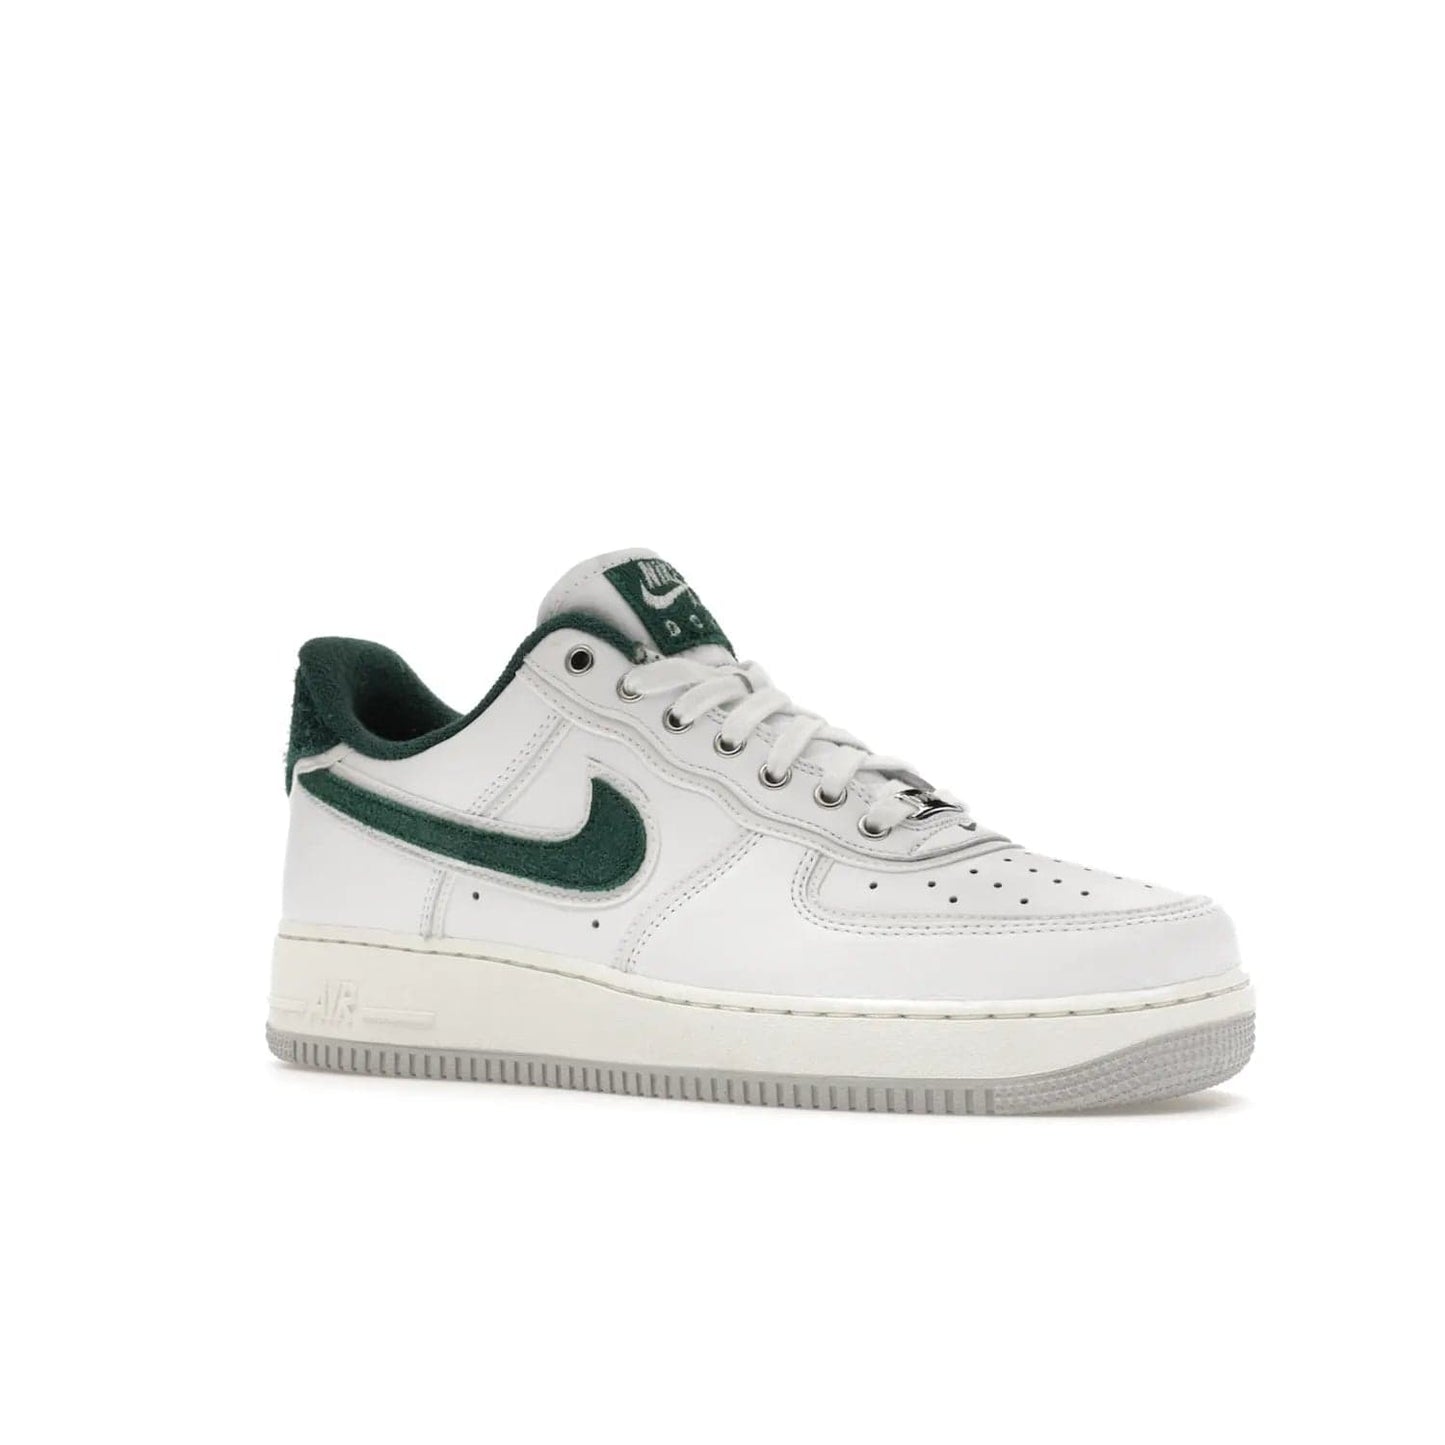 Nike Air Force 1 Low '07 Premium University of Oregon PE - Image 4 - Only at www.BallersClubKickz.com - The Nike Air Force 1 Low '07 Premium. Special Oregon University colorway. White base with green and sail accents. Cushioned rubber midsole. Comfort and style. Support your school!